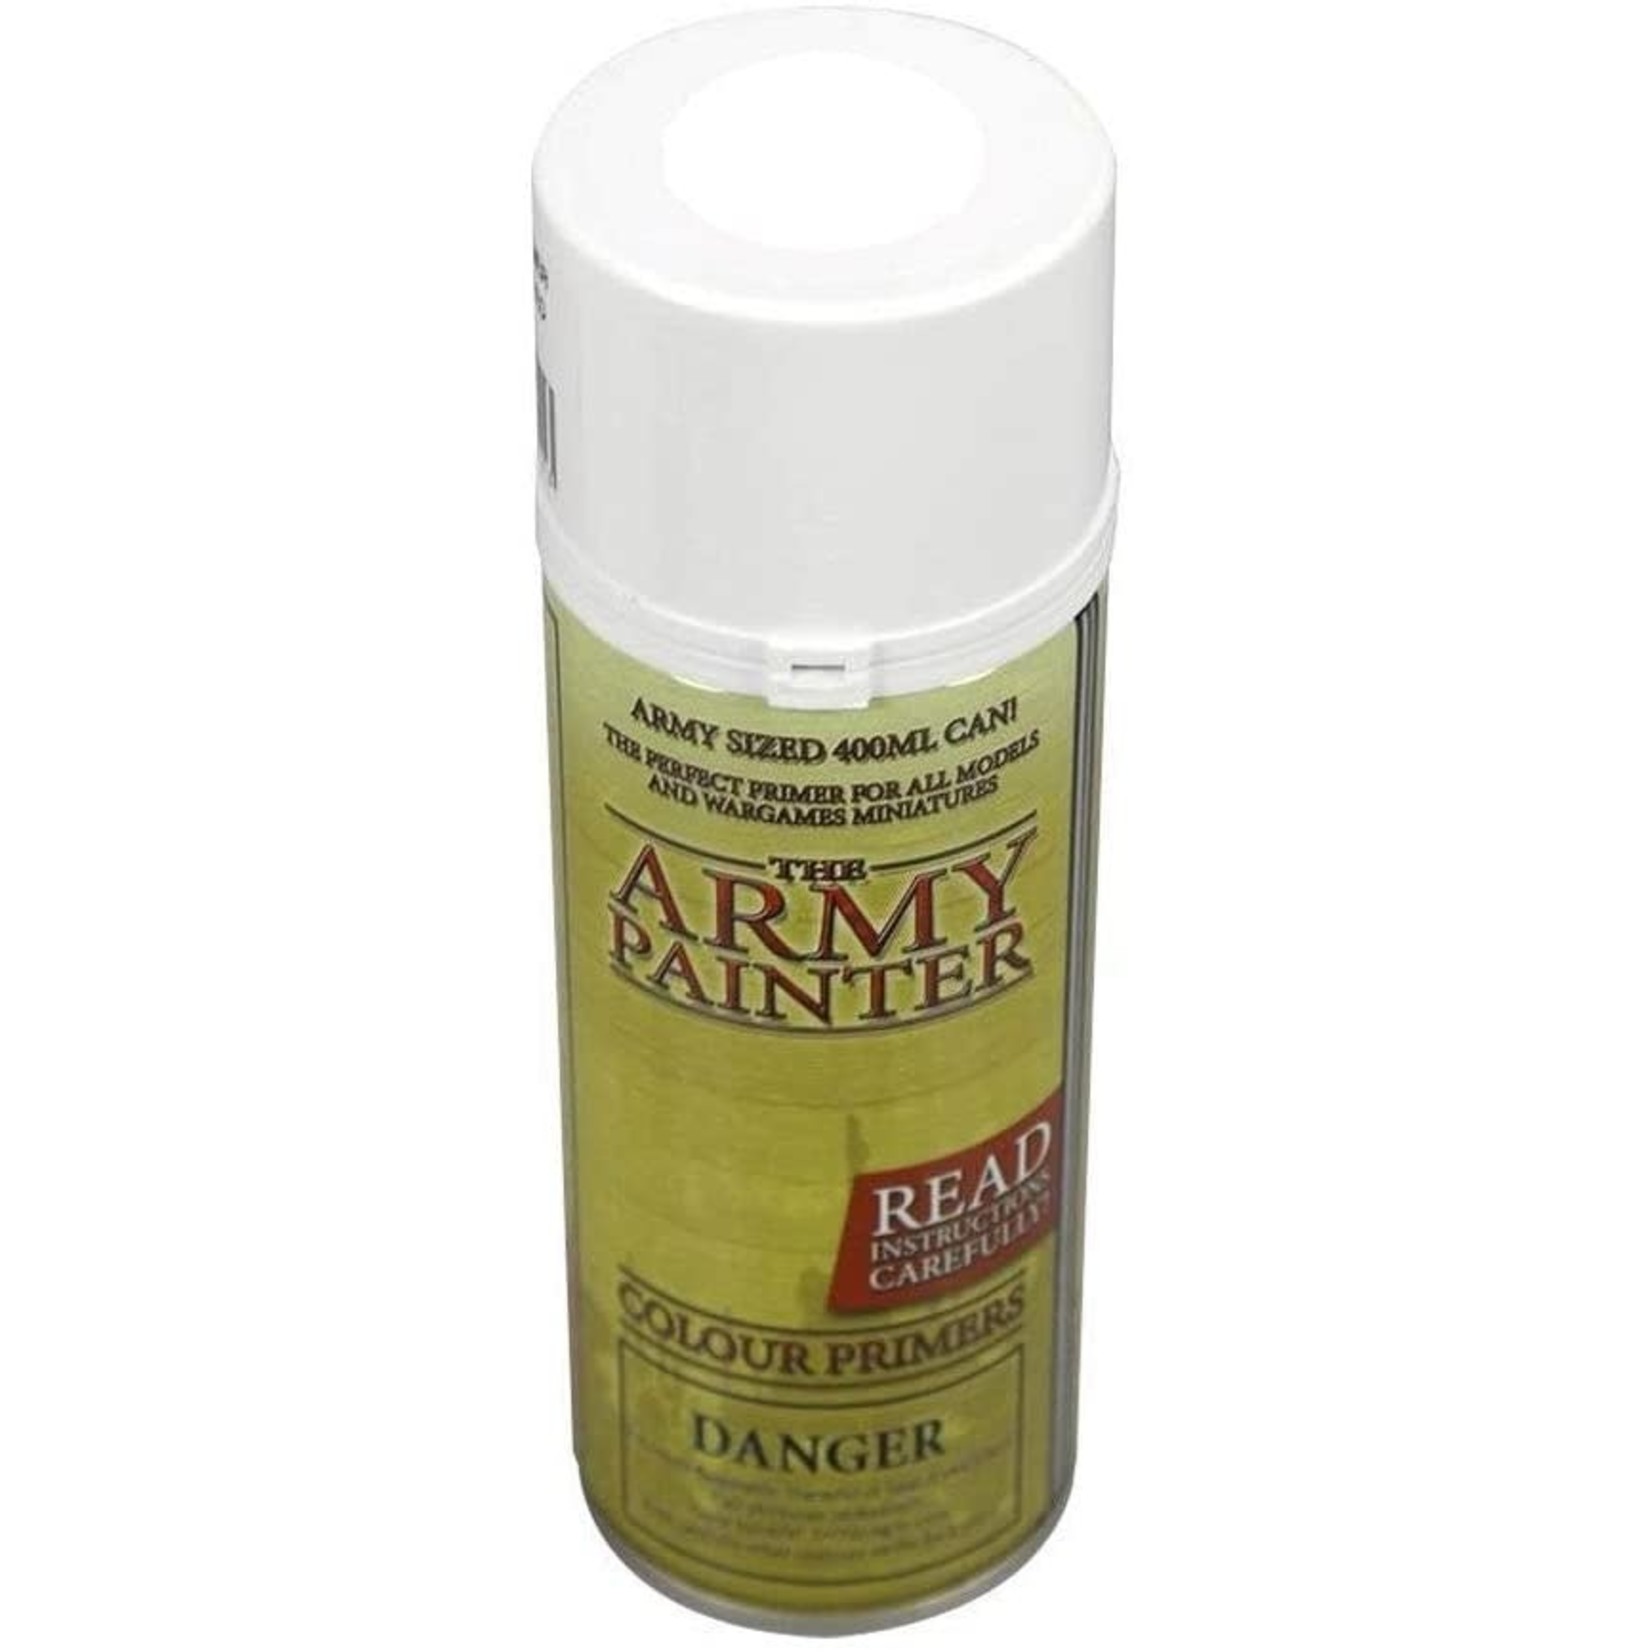 The Army Painter Miniature & Model Tools: Matte White Primer